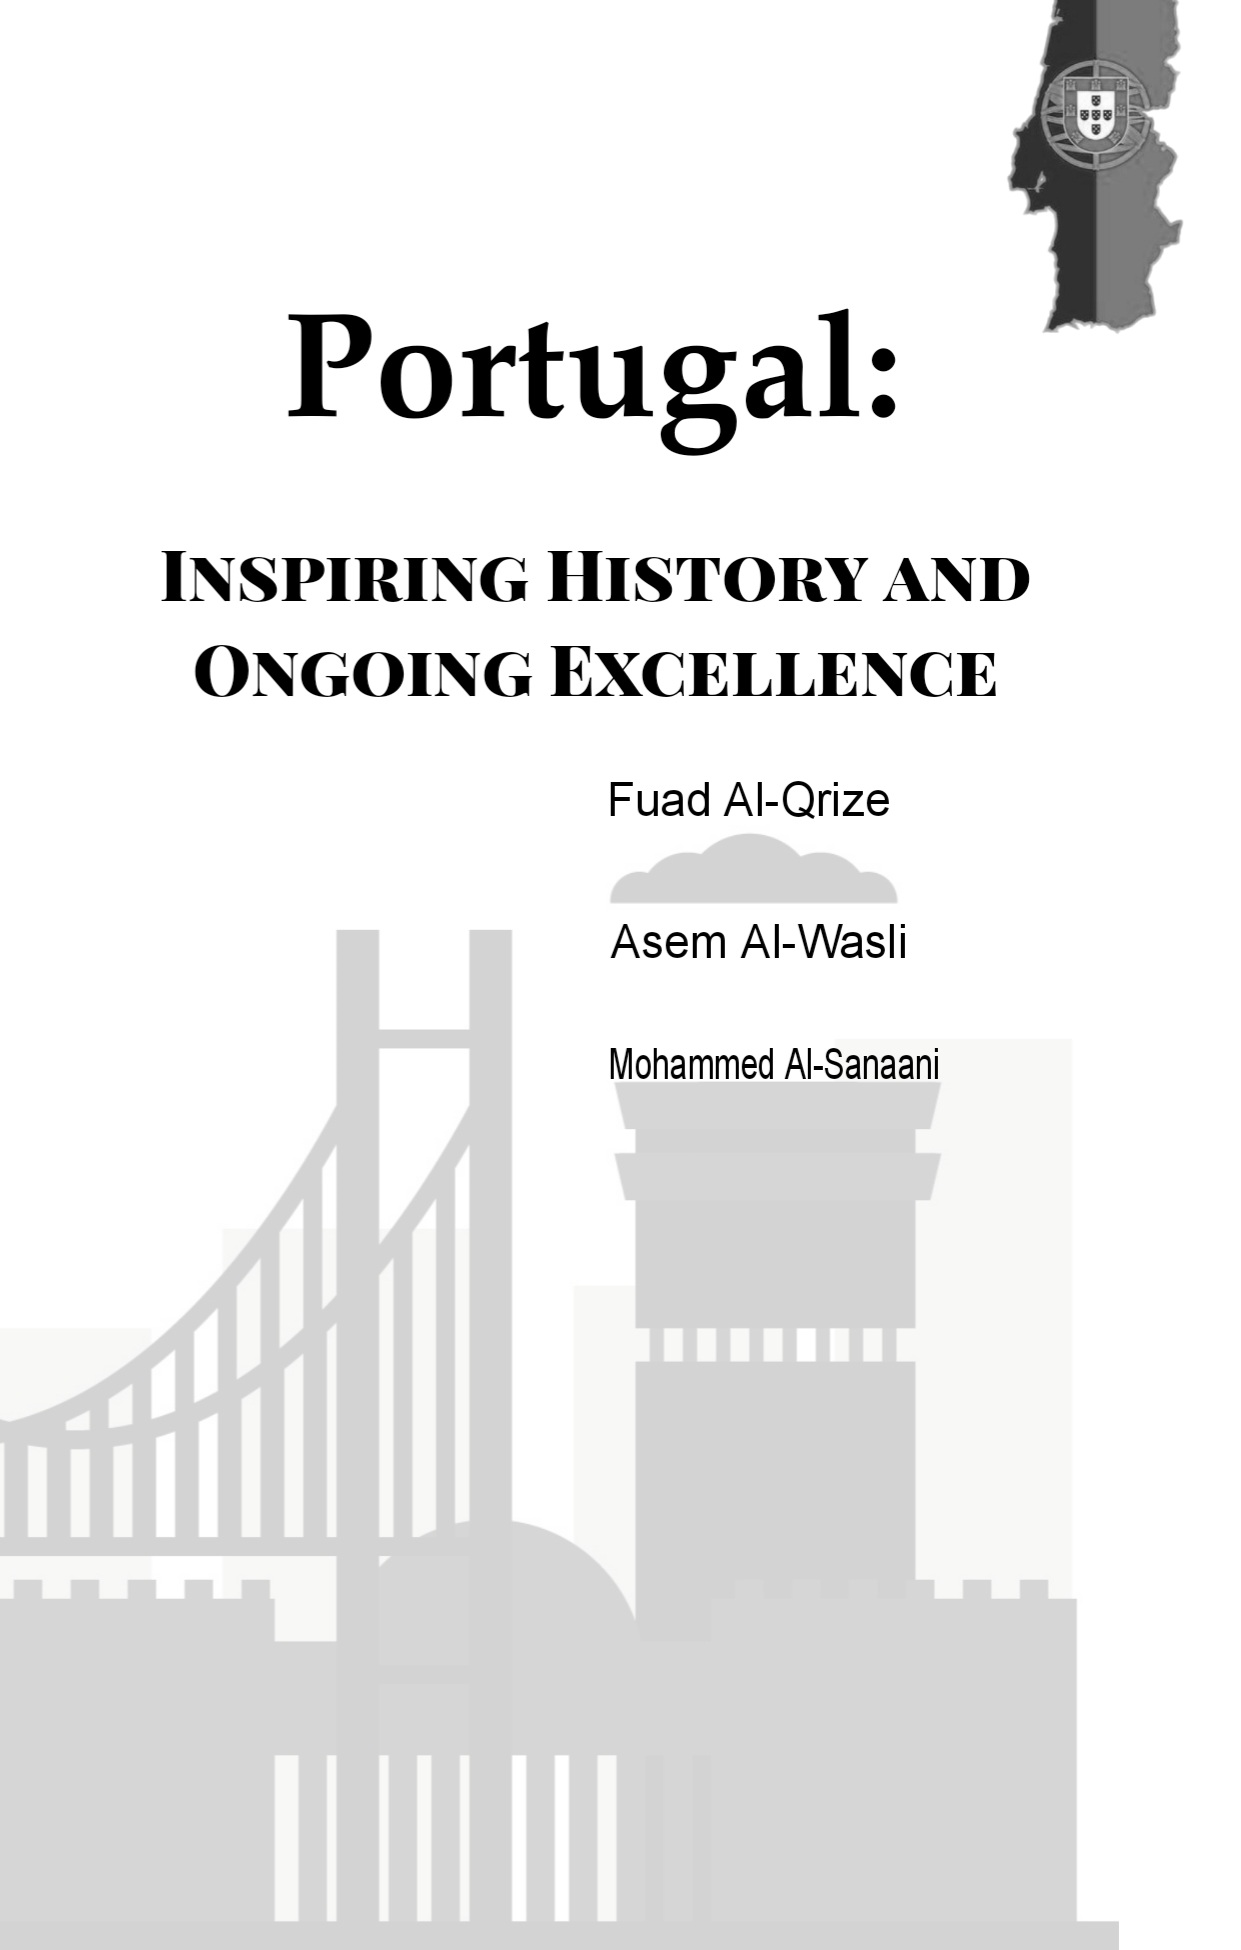 TPortugal: Inspiring History and Ongoing Excellence